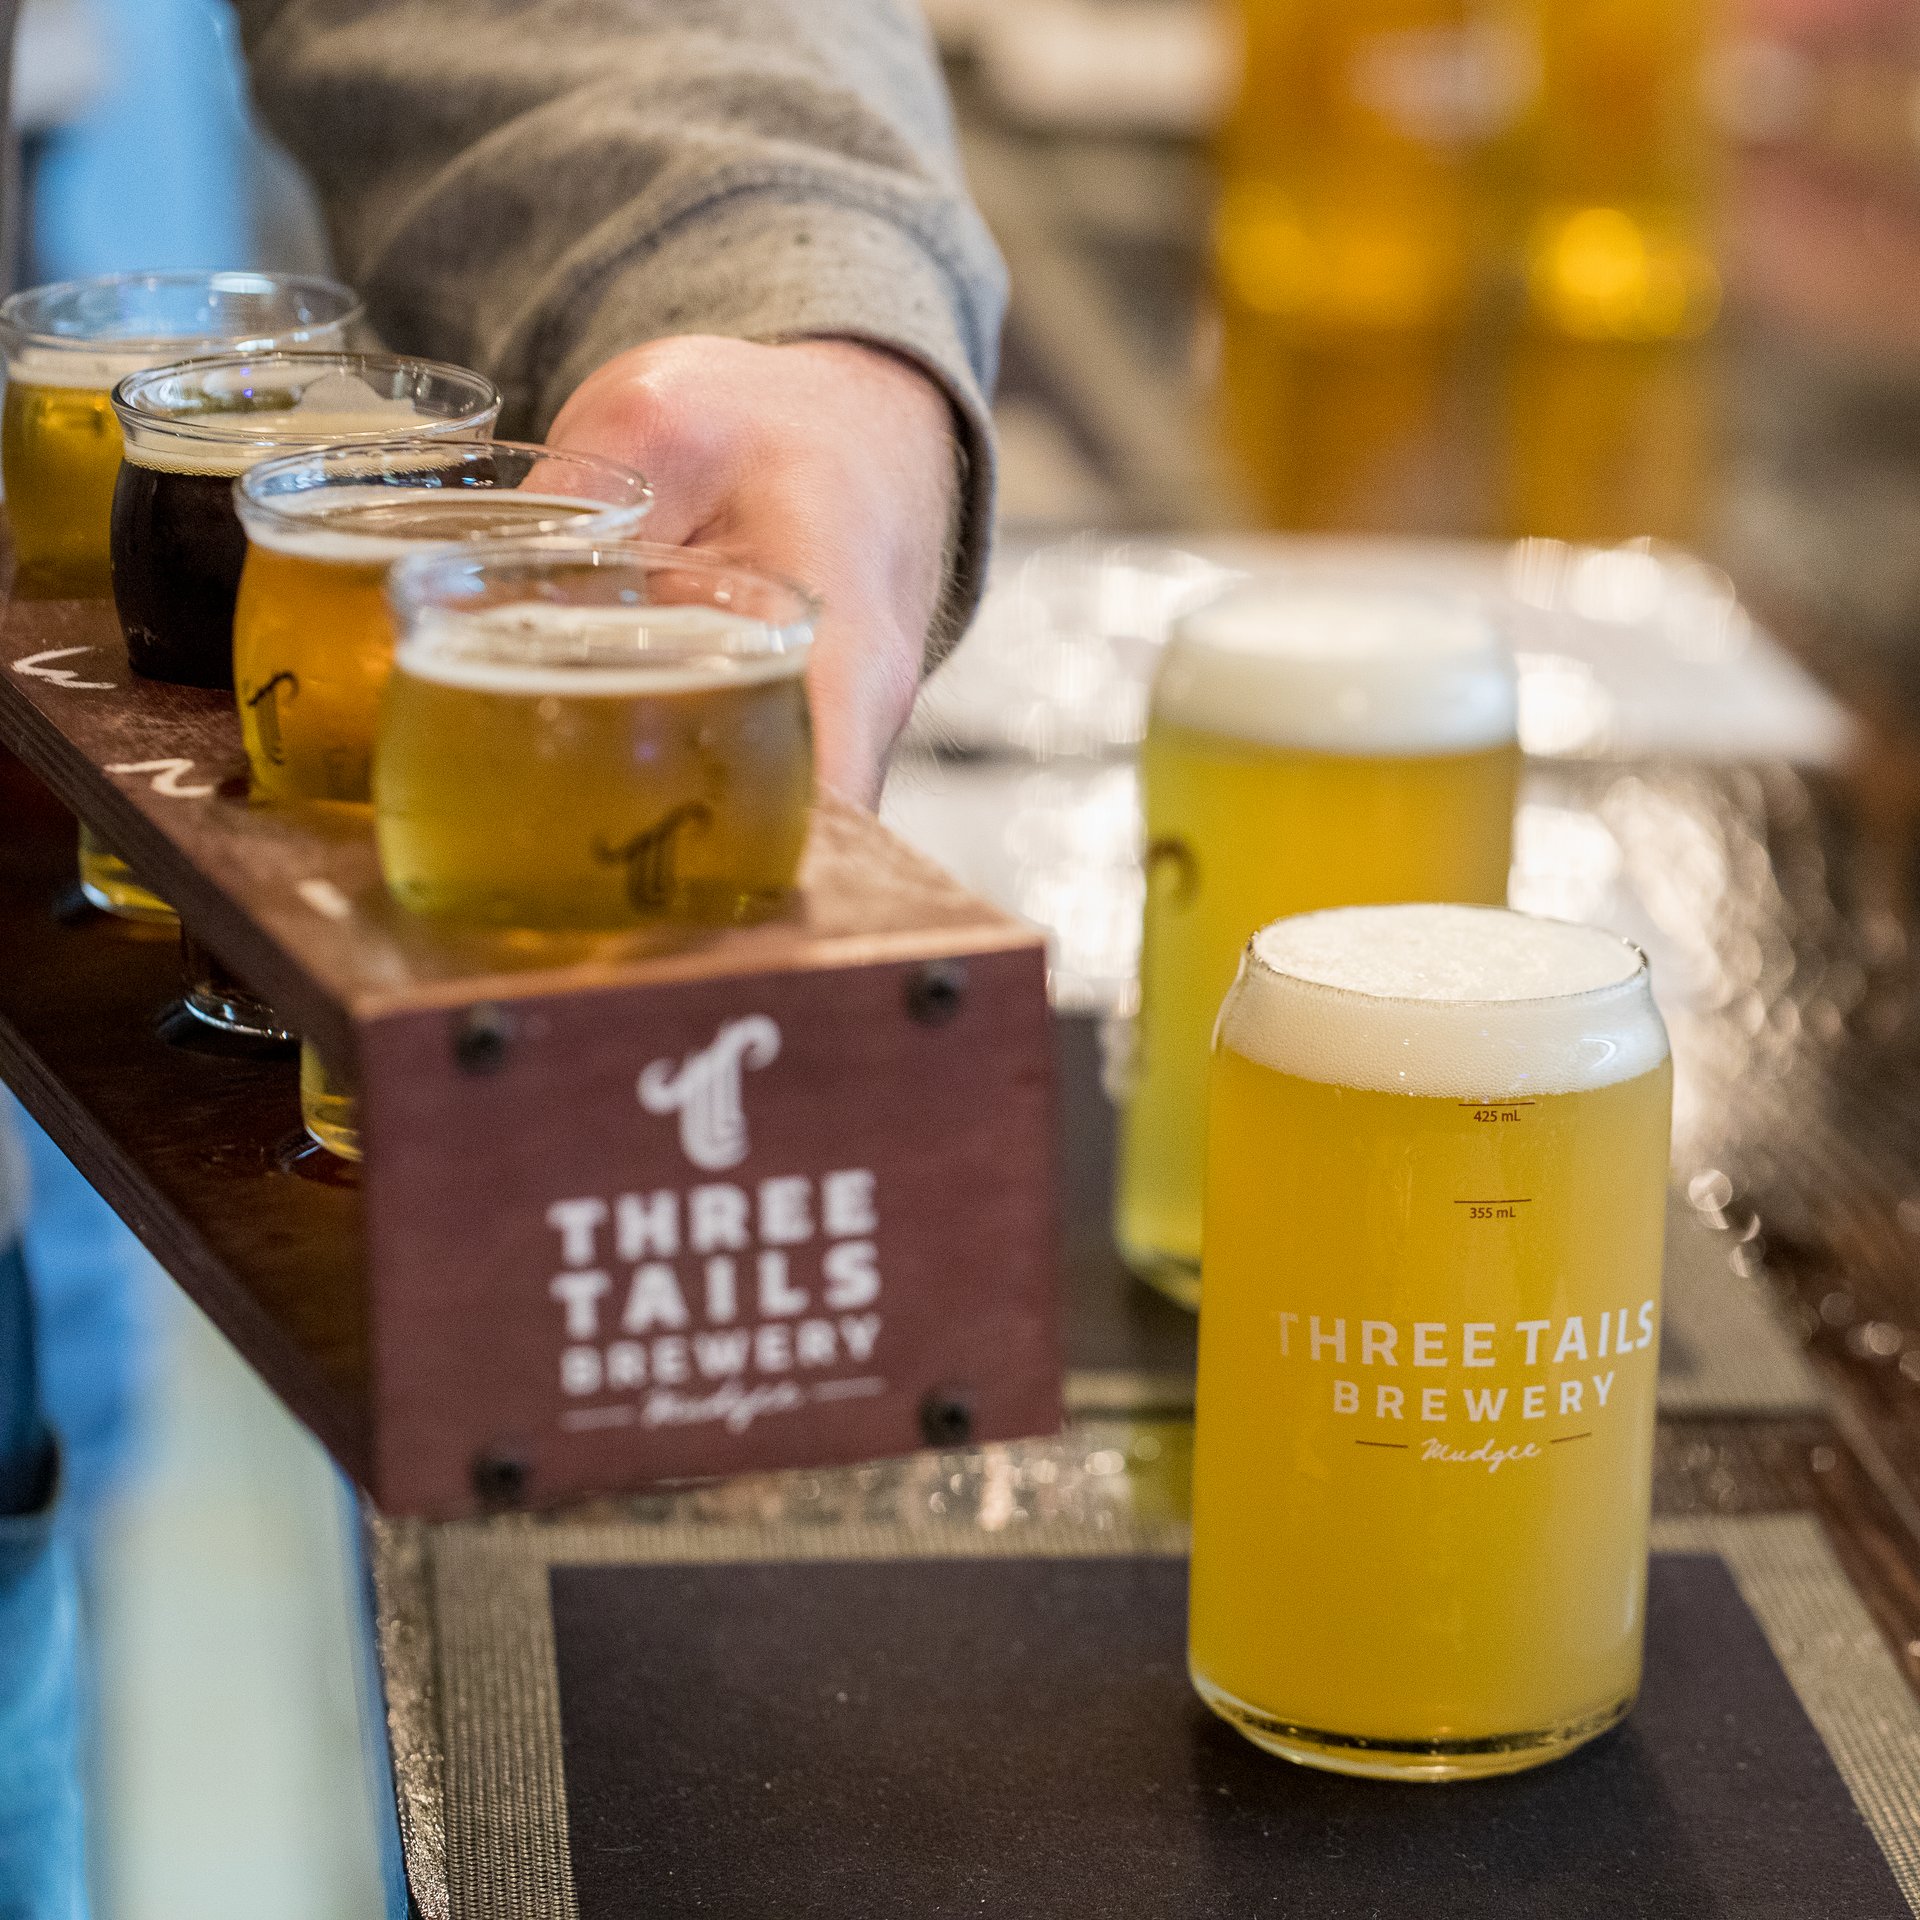 Paddle of Three Tails Brewery beers